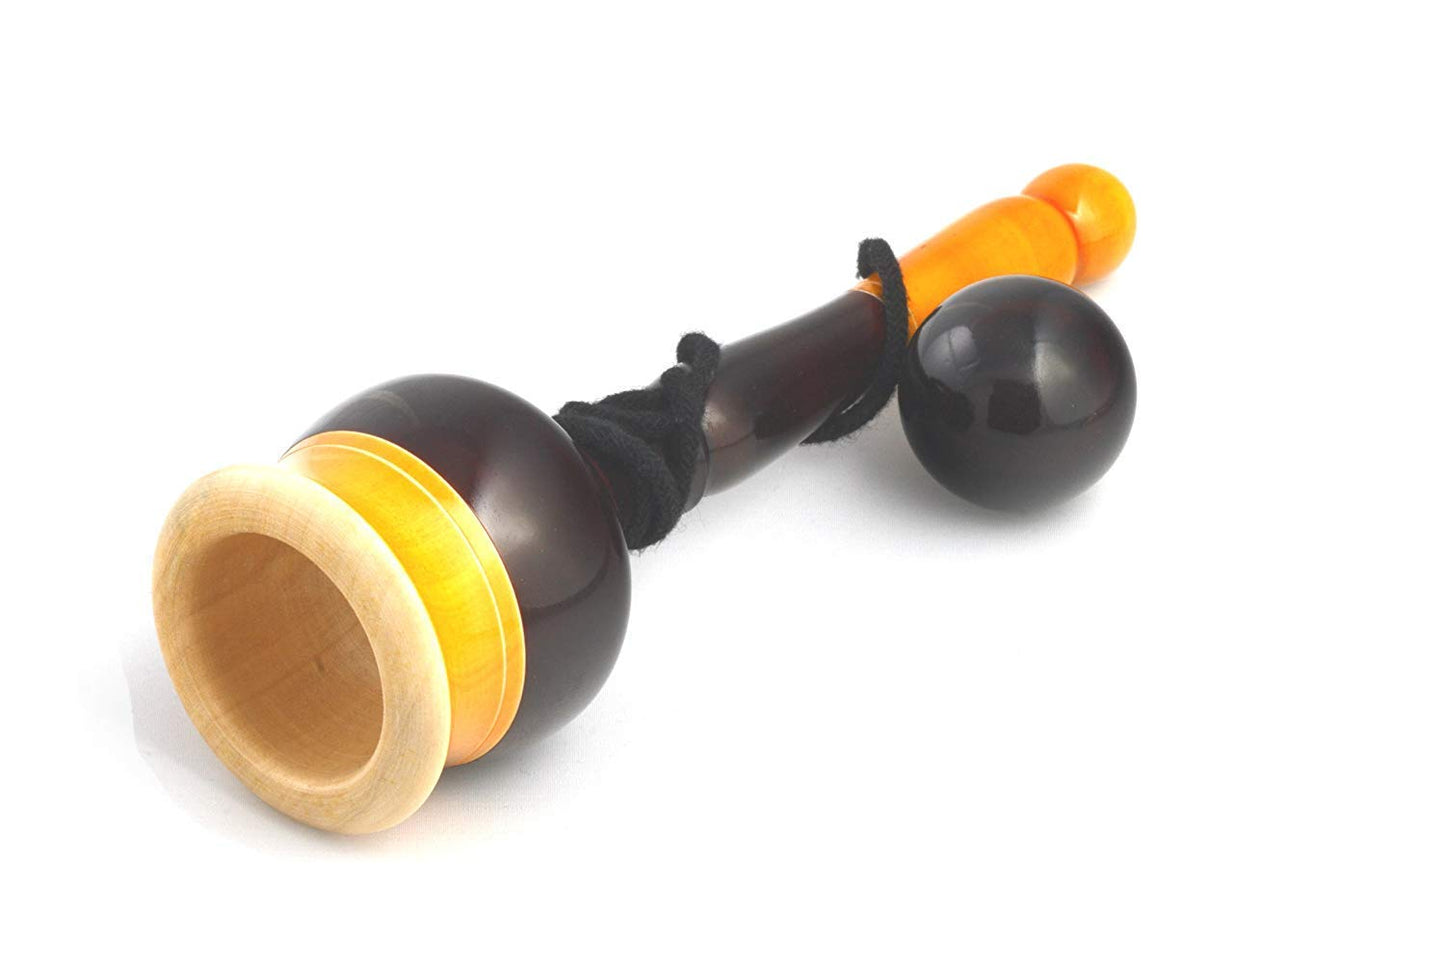 Wooden Toy For Kids, Cup And Ball Wooden Toy - Made In India